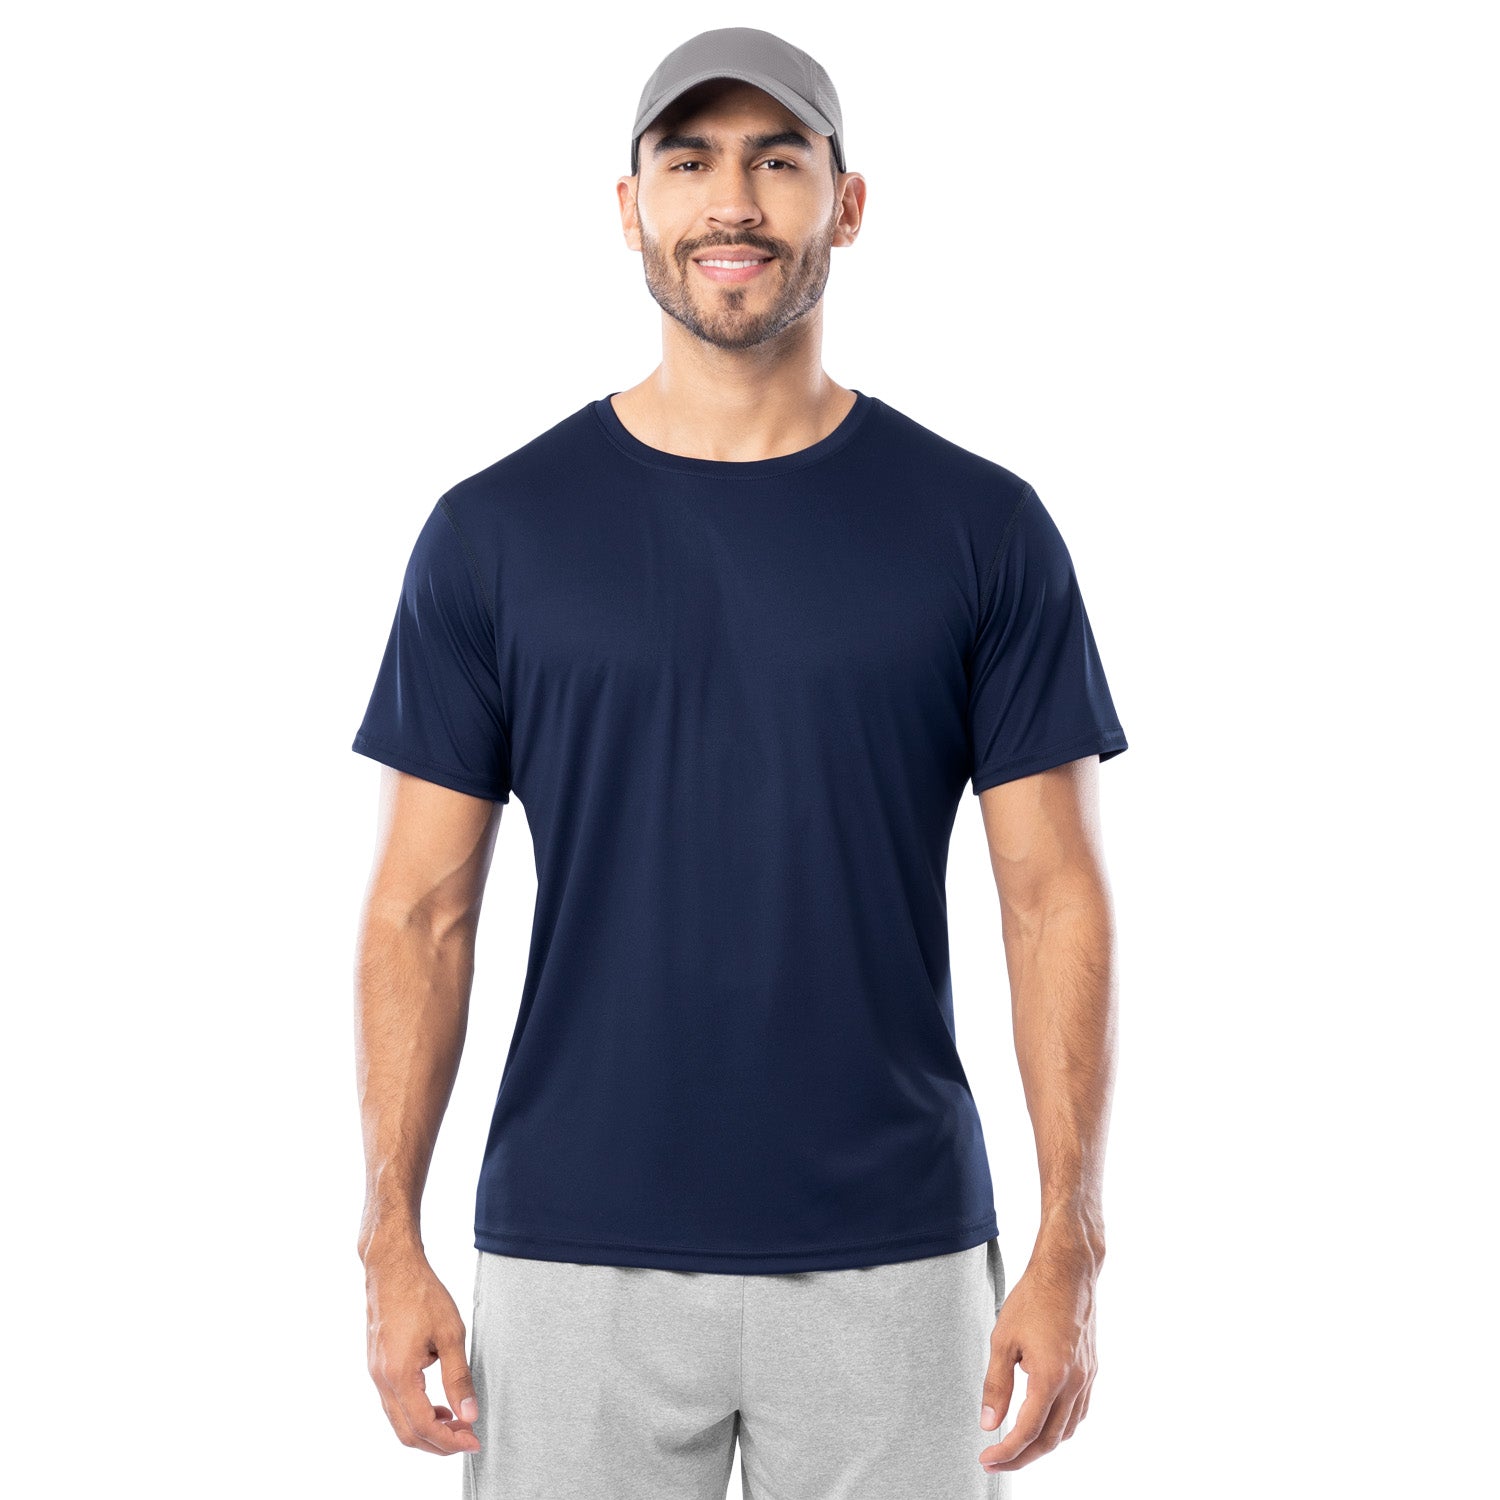 Men's Graphic T-Shirts in Blue for Training